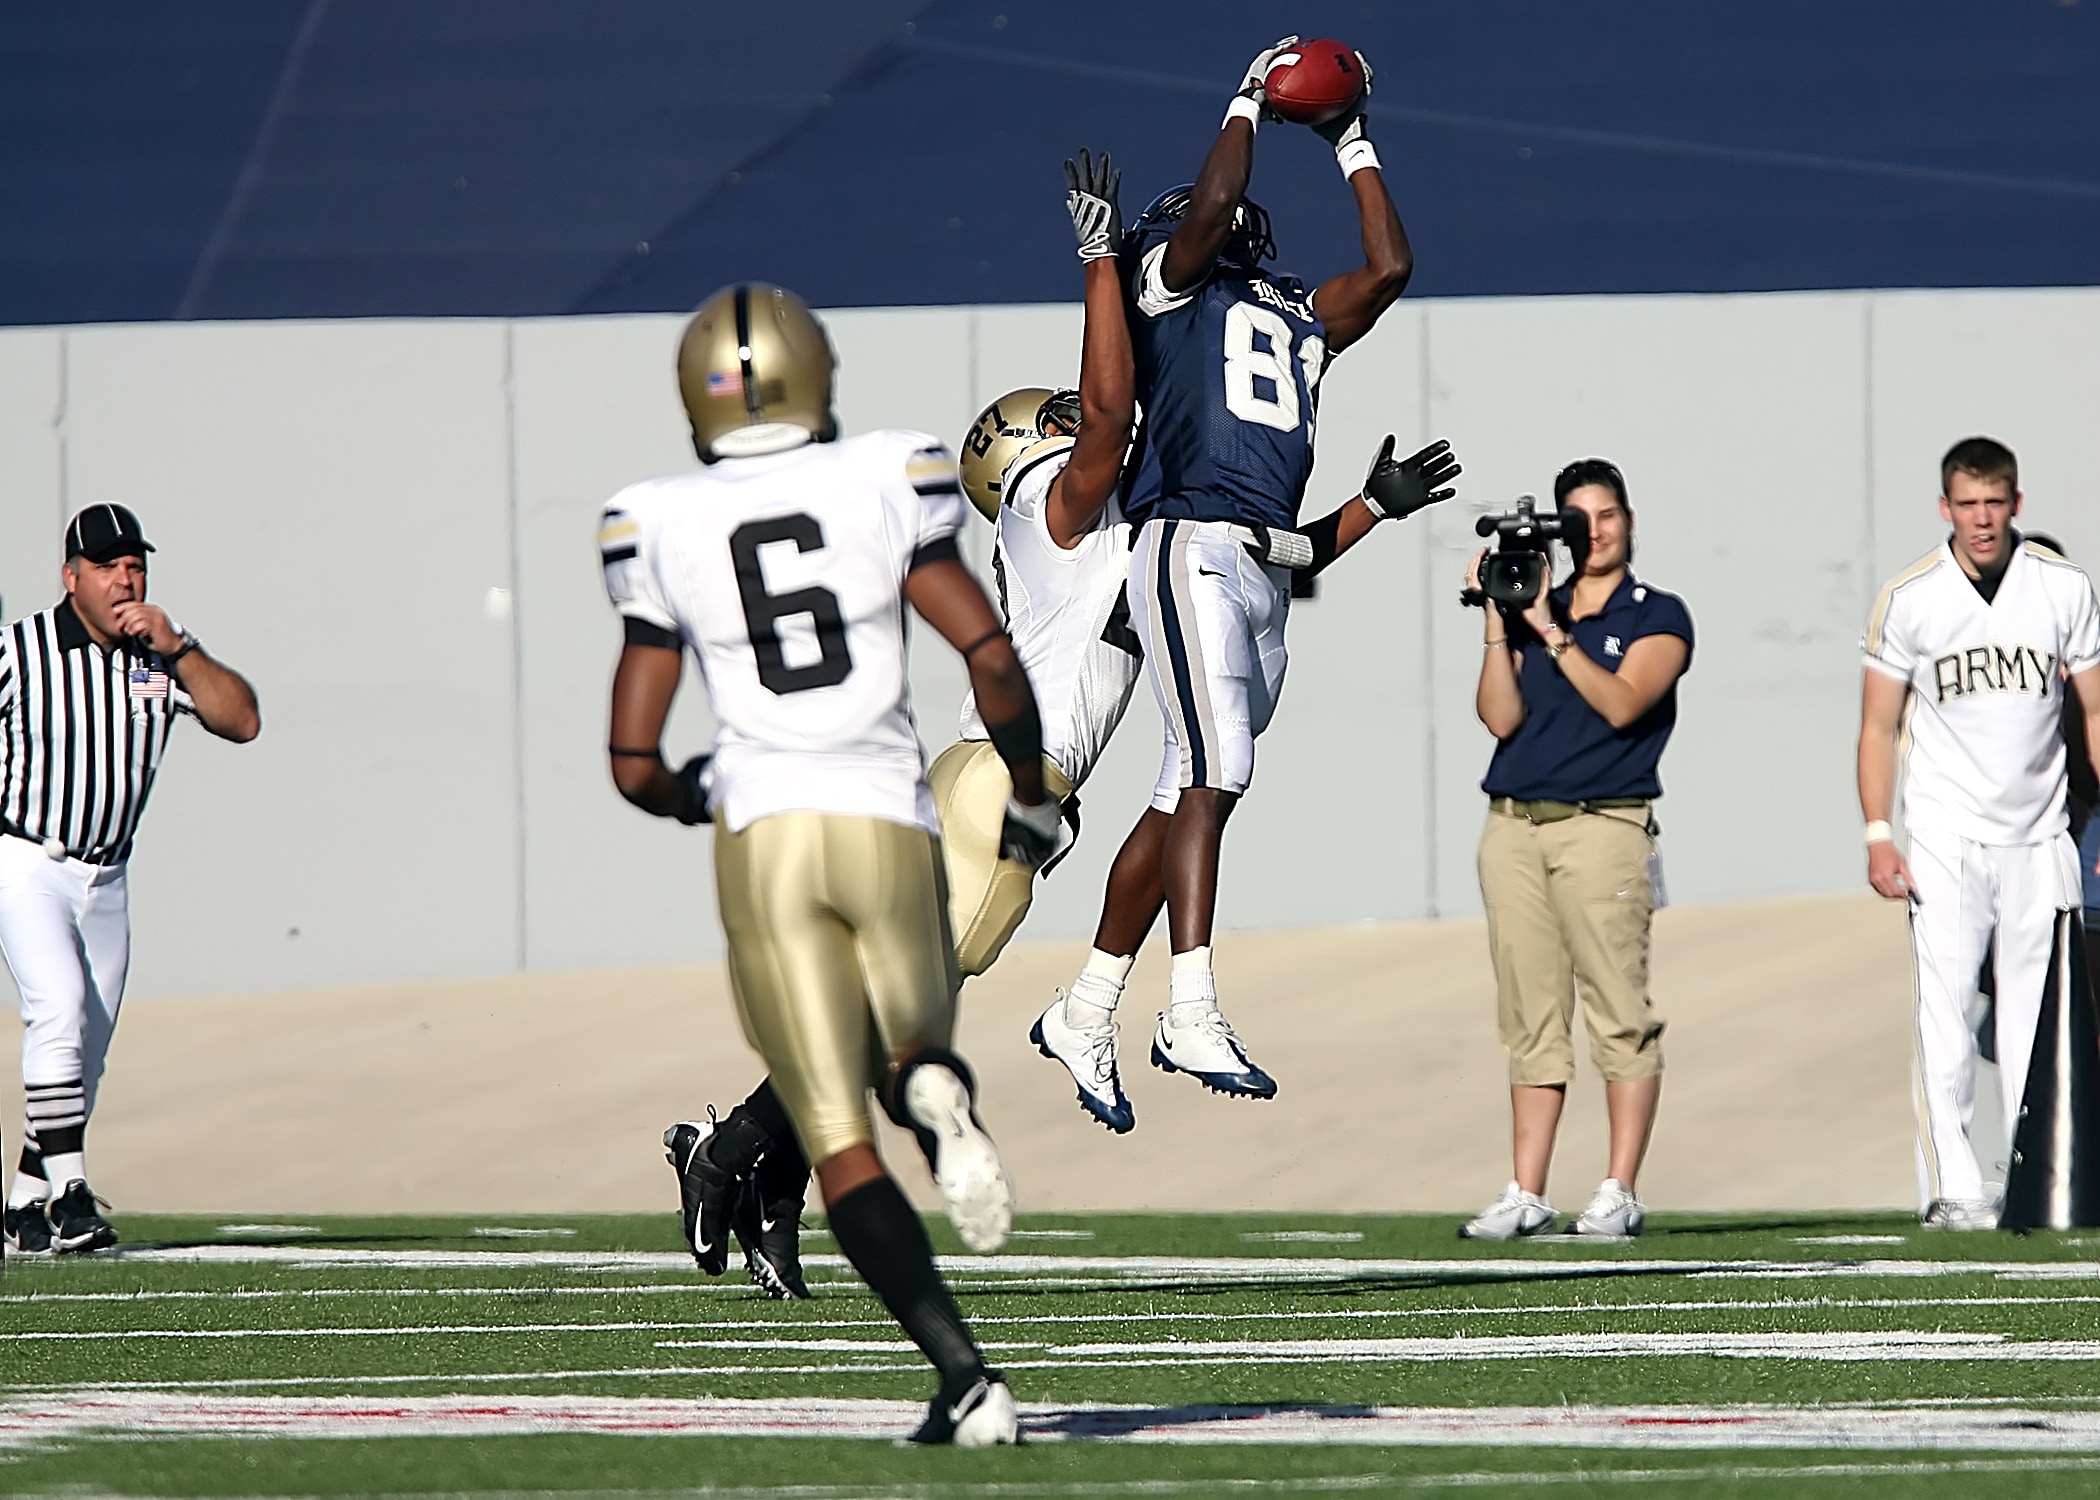 american football player catching ball in middle of the air